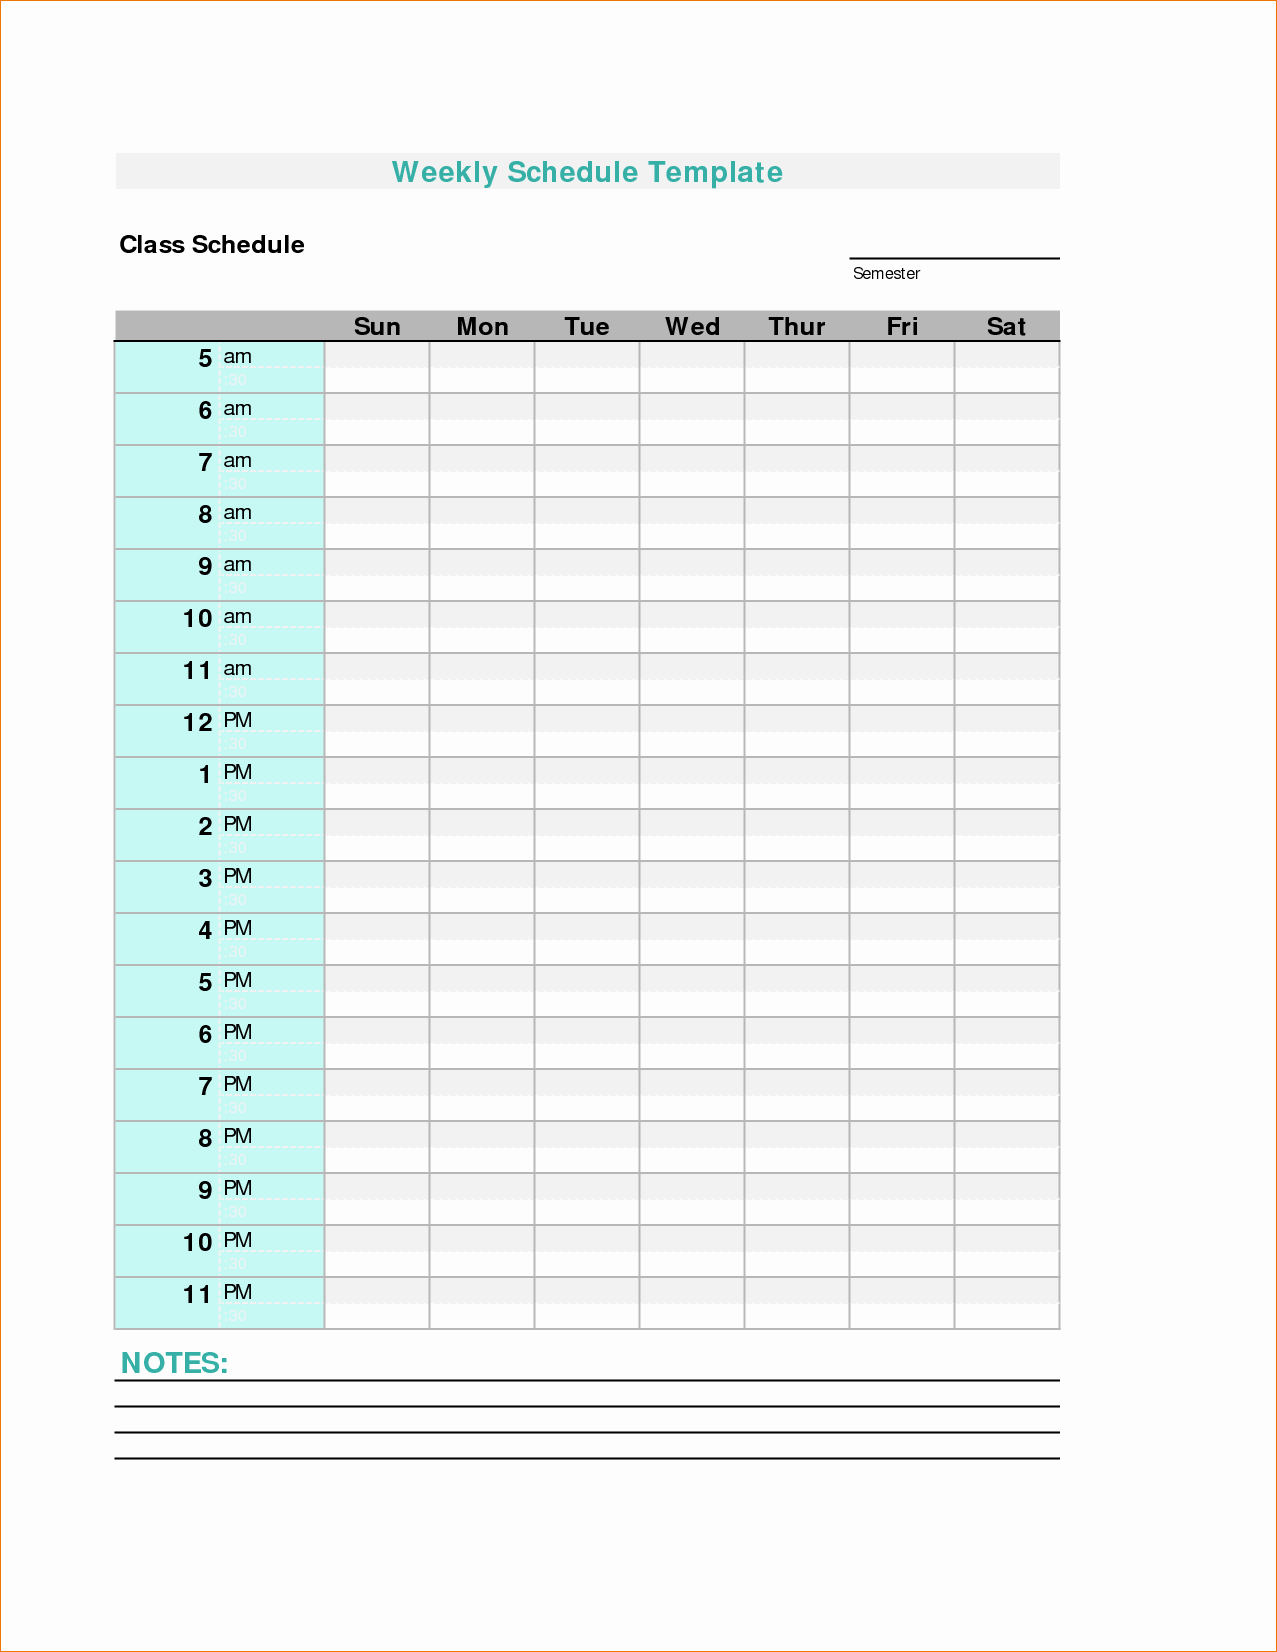 Weekly Schedule Template with Time Fresh 3 Weekly Schedule Template Pdf